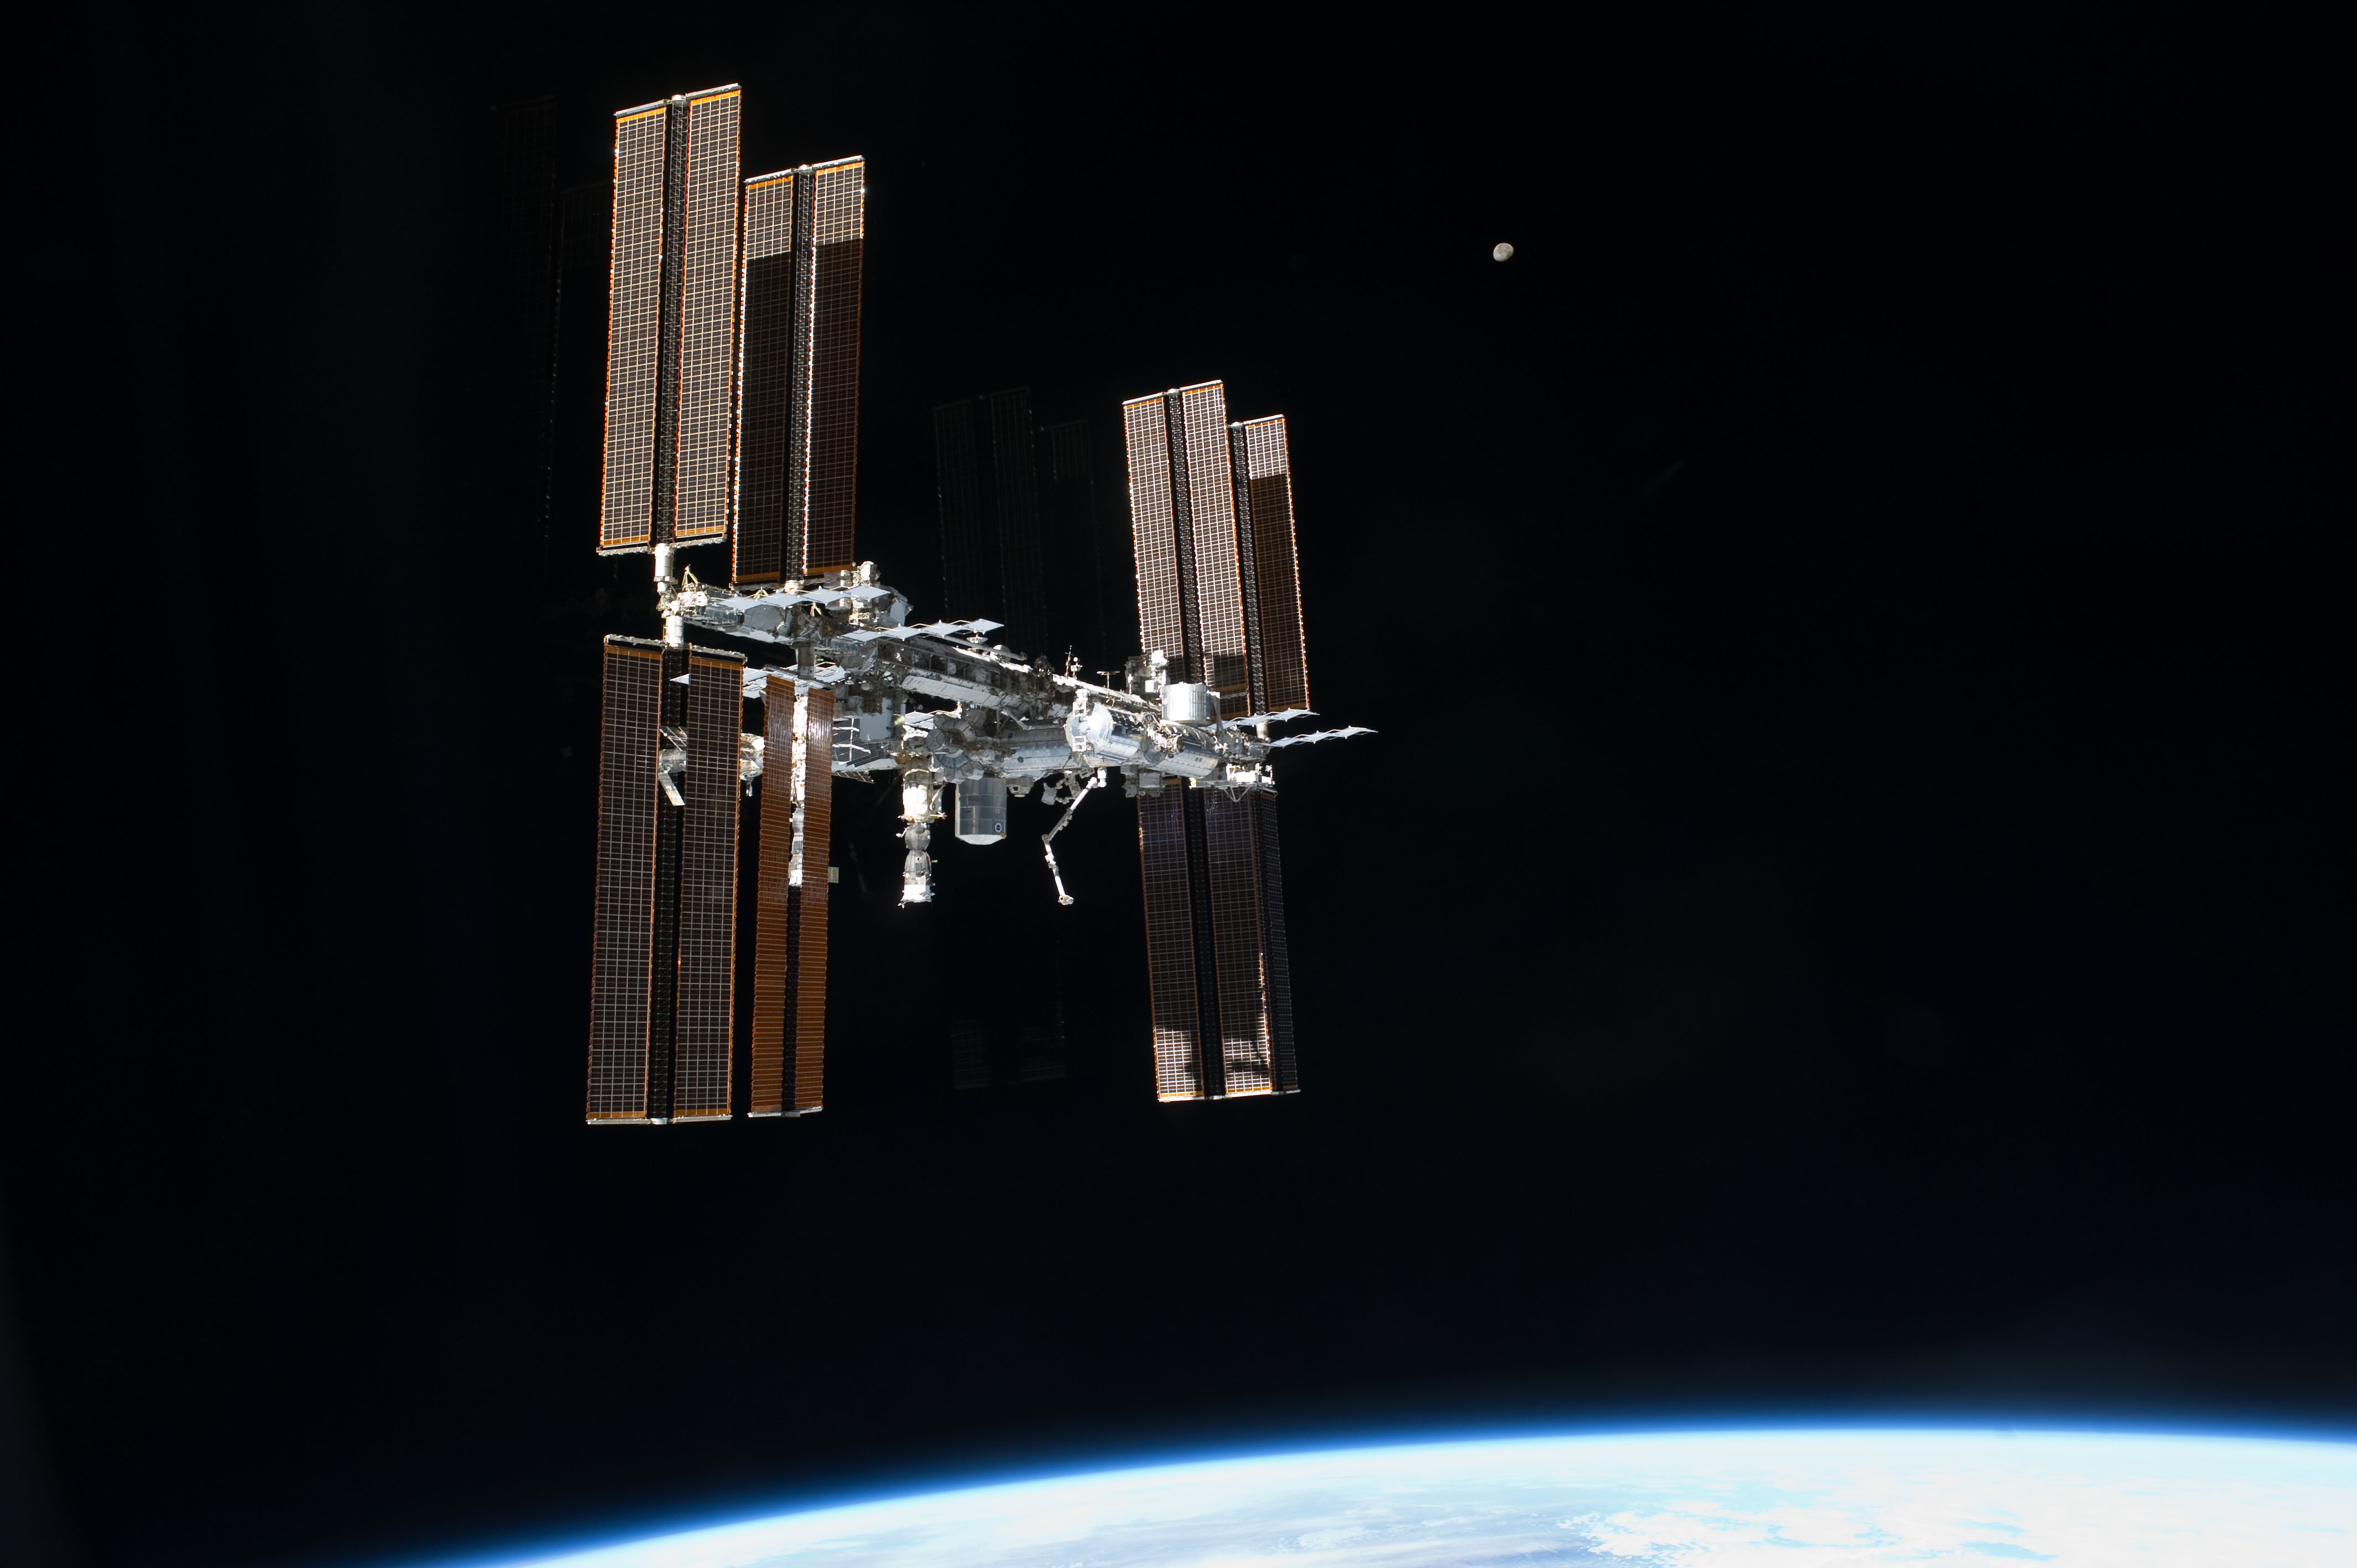 Now structurally complete and transitioning from post-construction into full utilization, the International Space Station will expand in terms of its International Partners over the next few years. Photo Credit: NASA